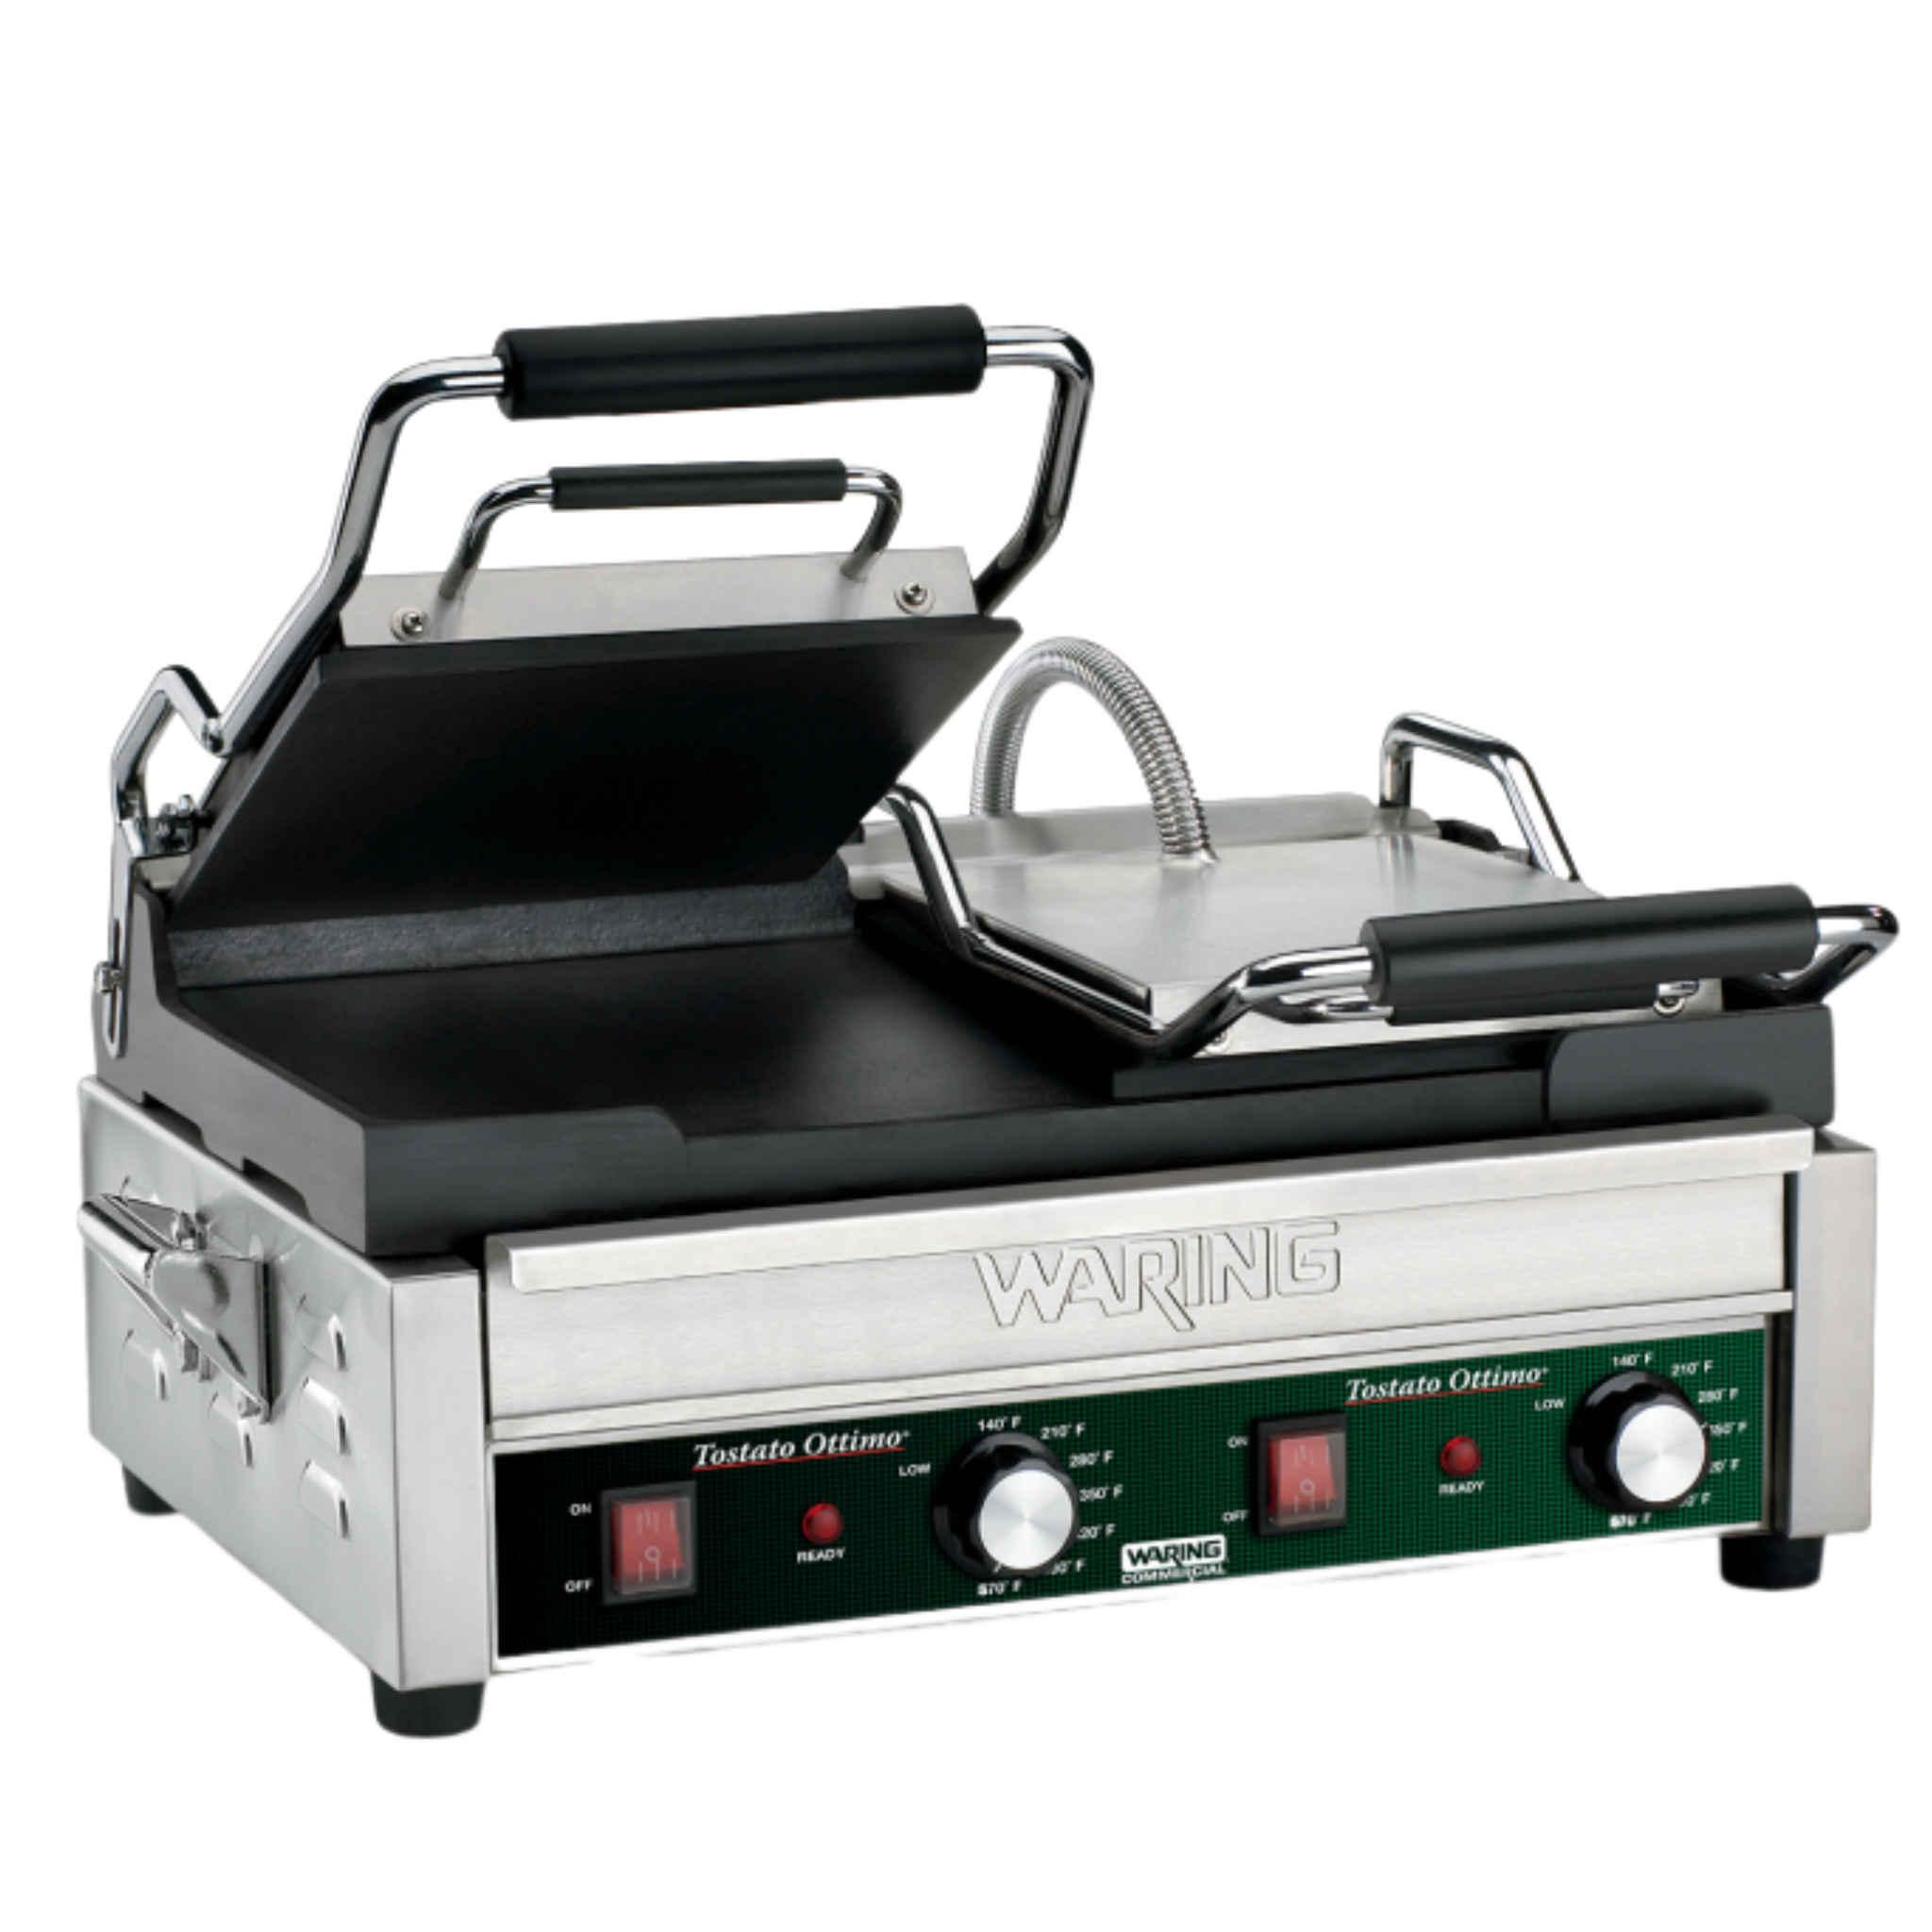 WFG300 Tostato Ottimo - Dual Flat Toasting Grill by Waring Commercial